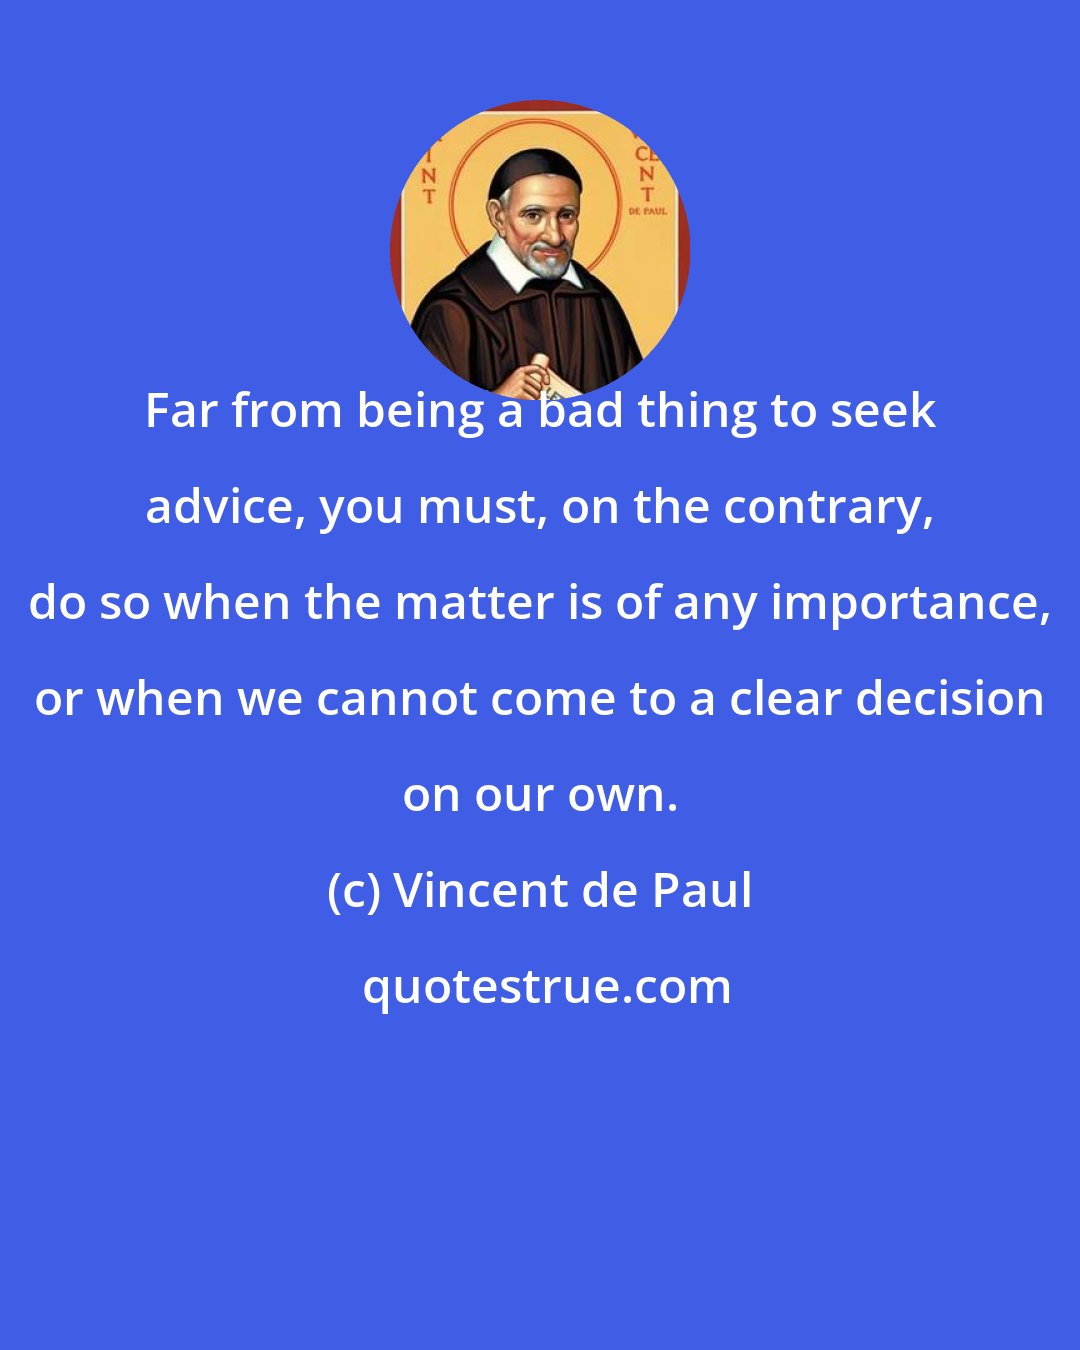 Vincent de Paul: Far from being a bad thing to seek advice, you must, on the contrary, do so when the matter is of any importance, or when we cannot come to a clear decision on our own.